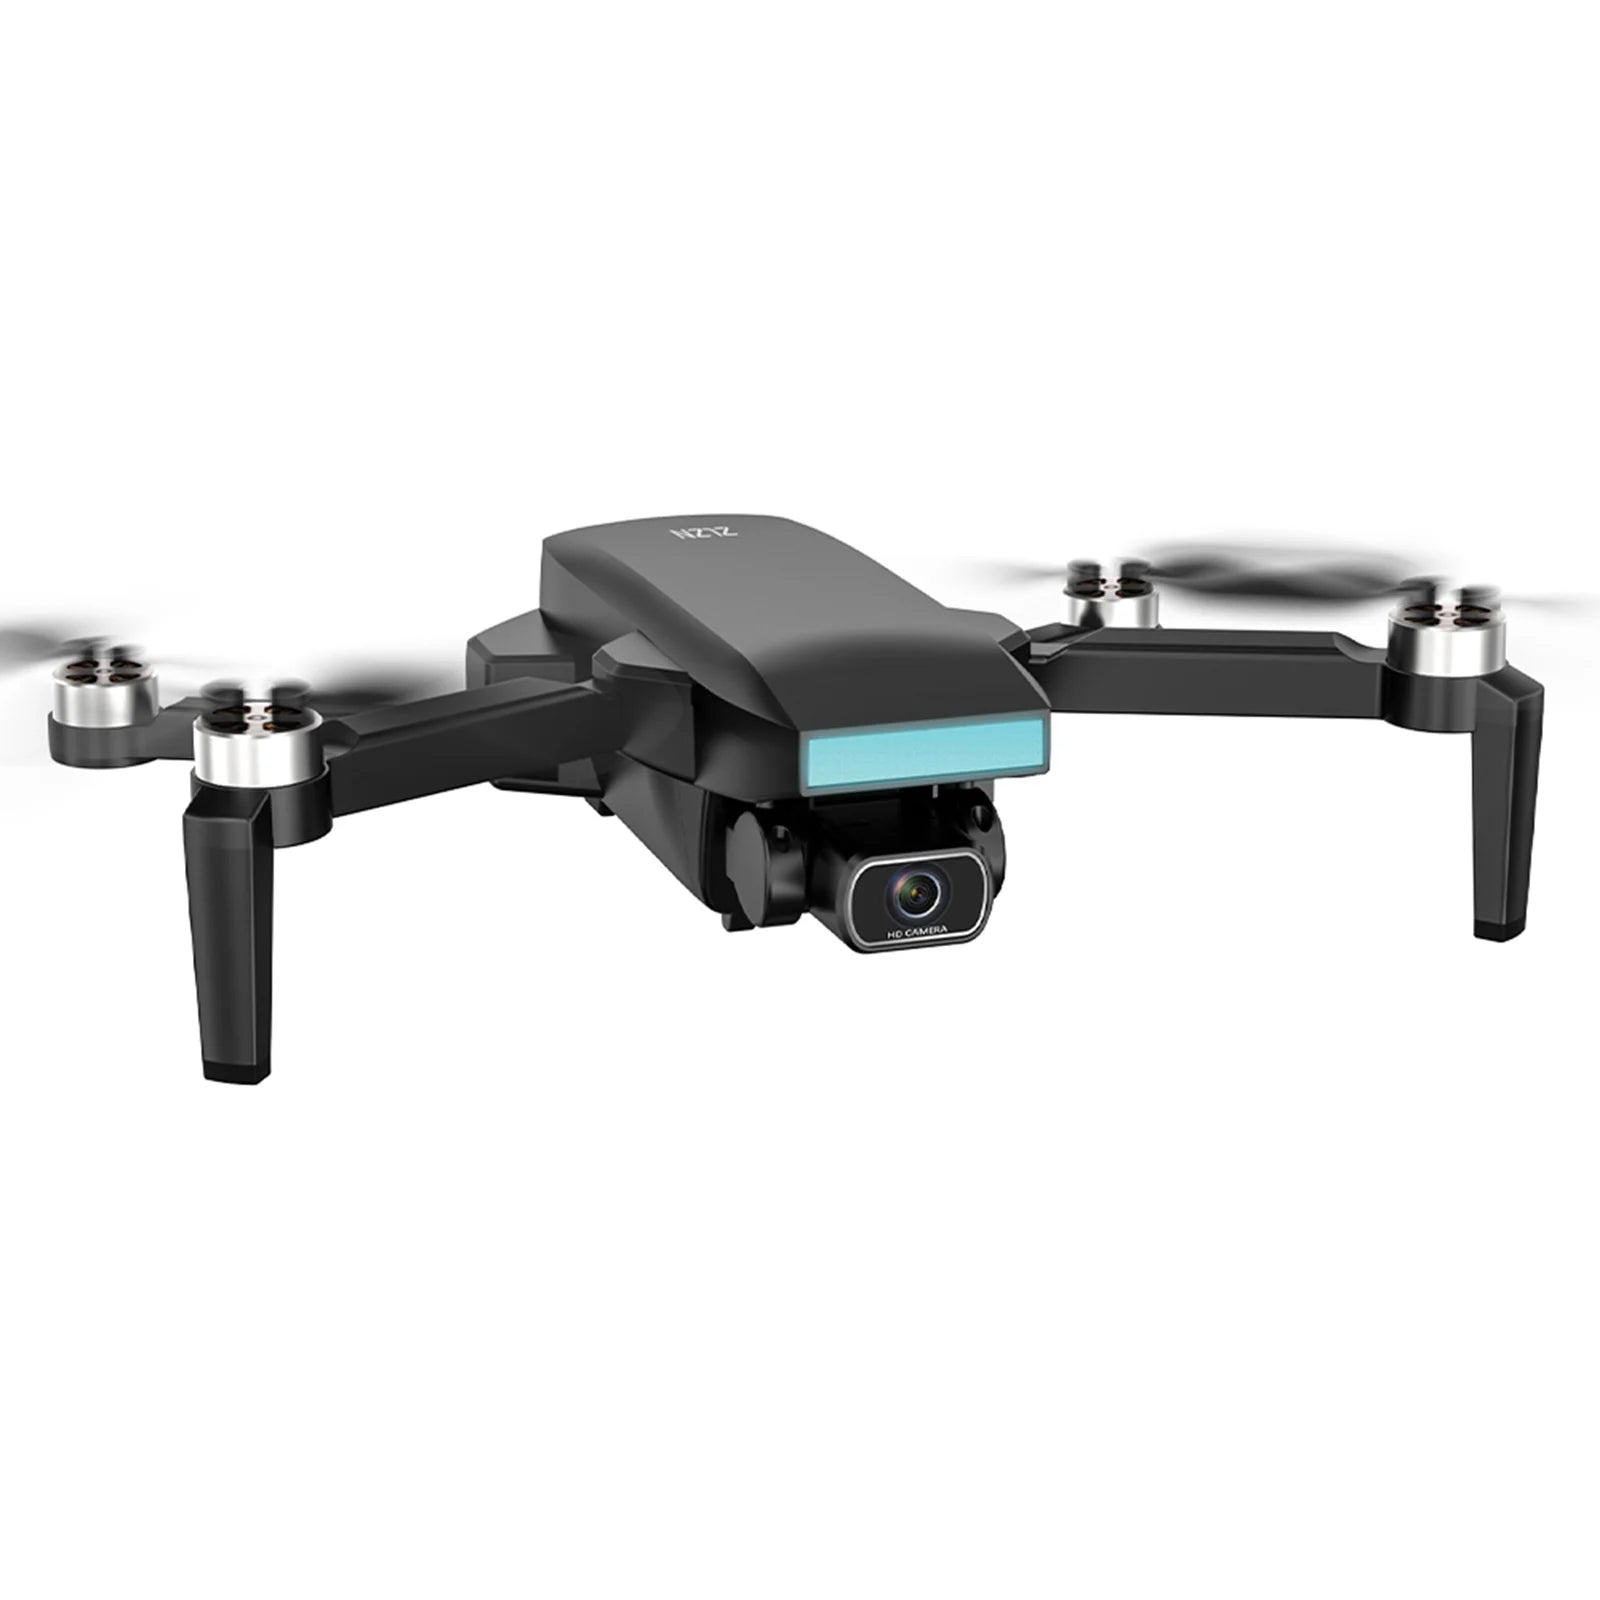 ZLL SG107 Pro Drone, the actual color of the item might be slightly different from the color shown